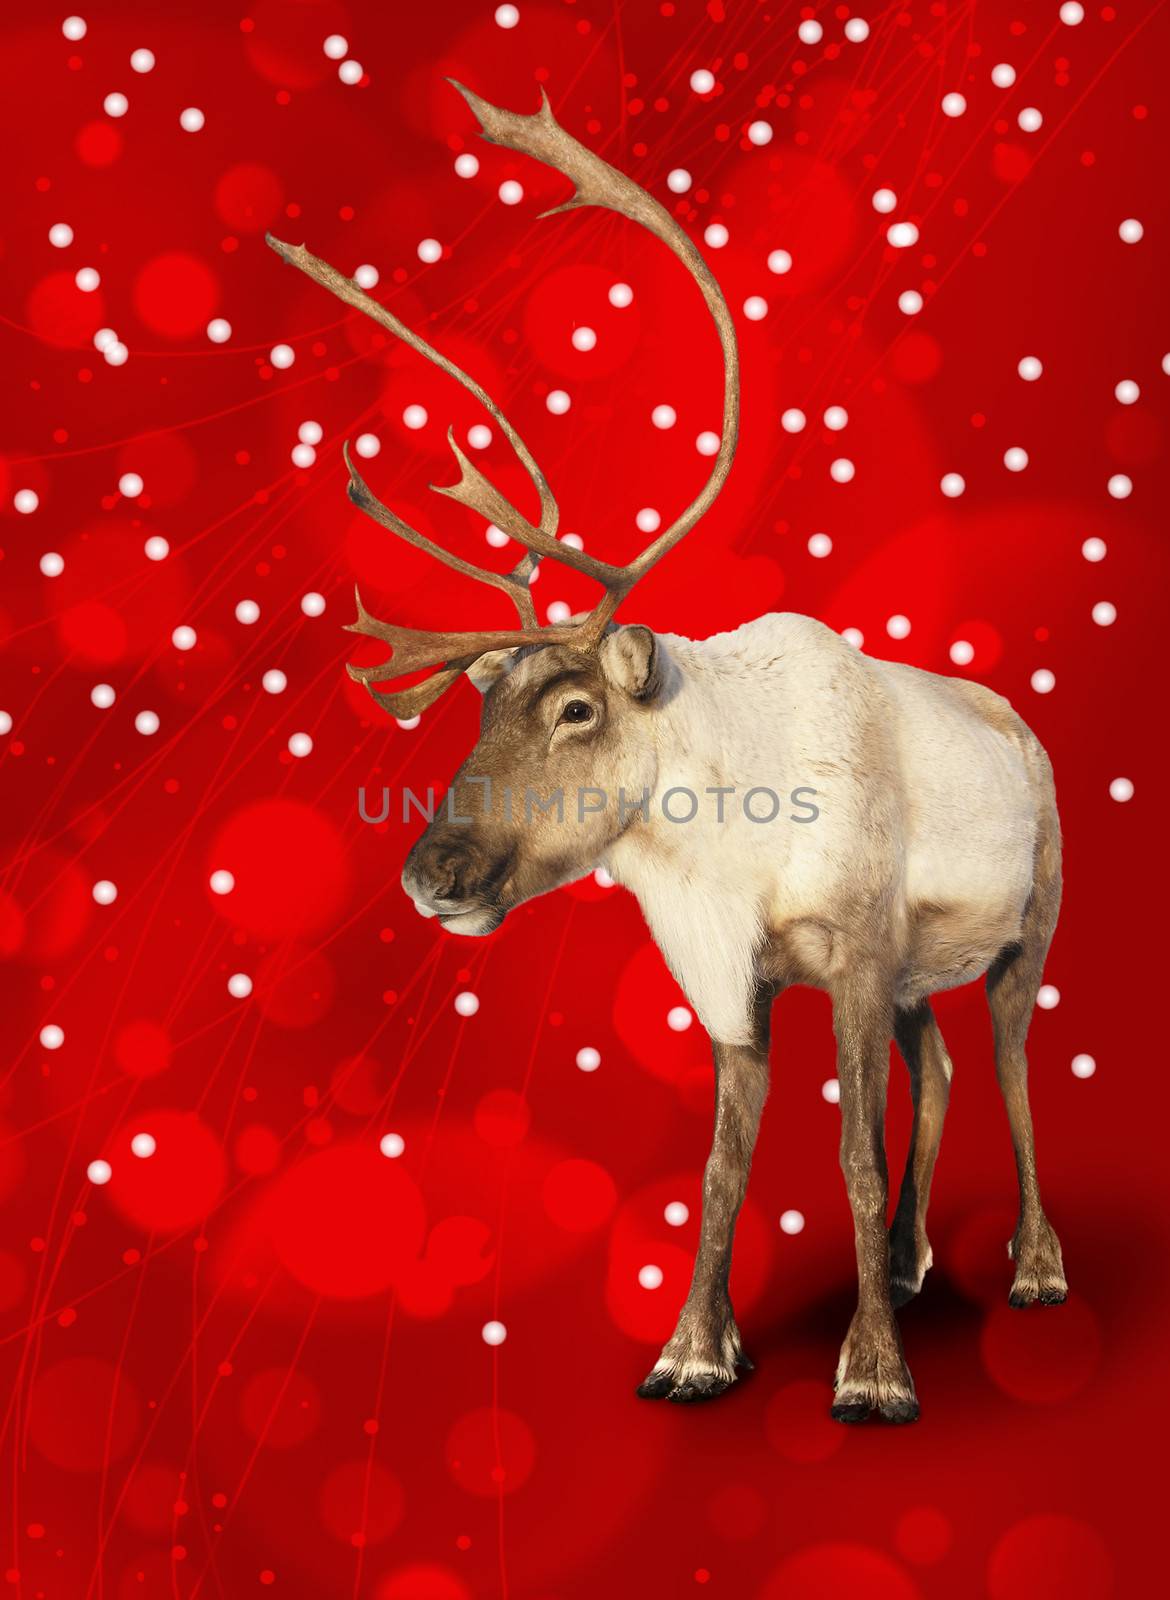 Caribou reindeer on red Christmas bokeh background.